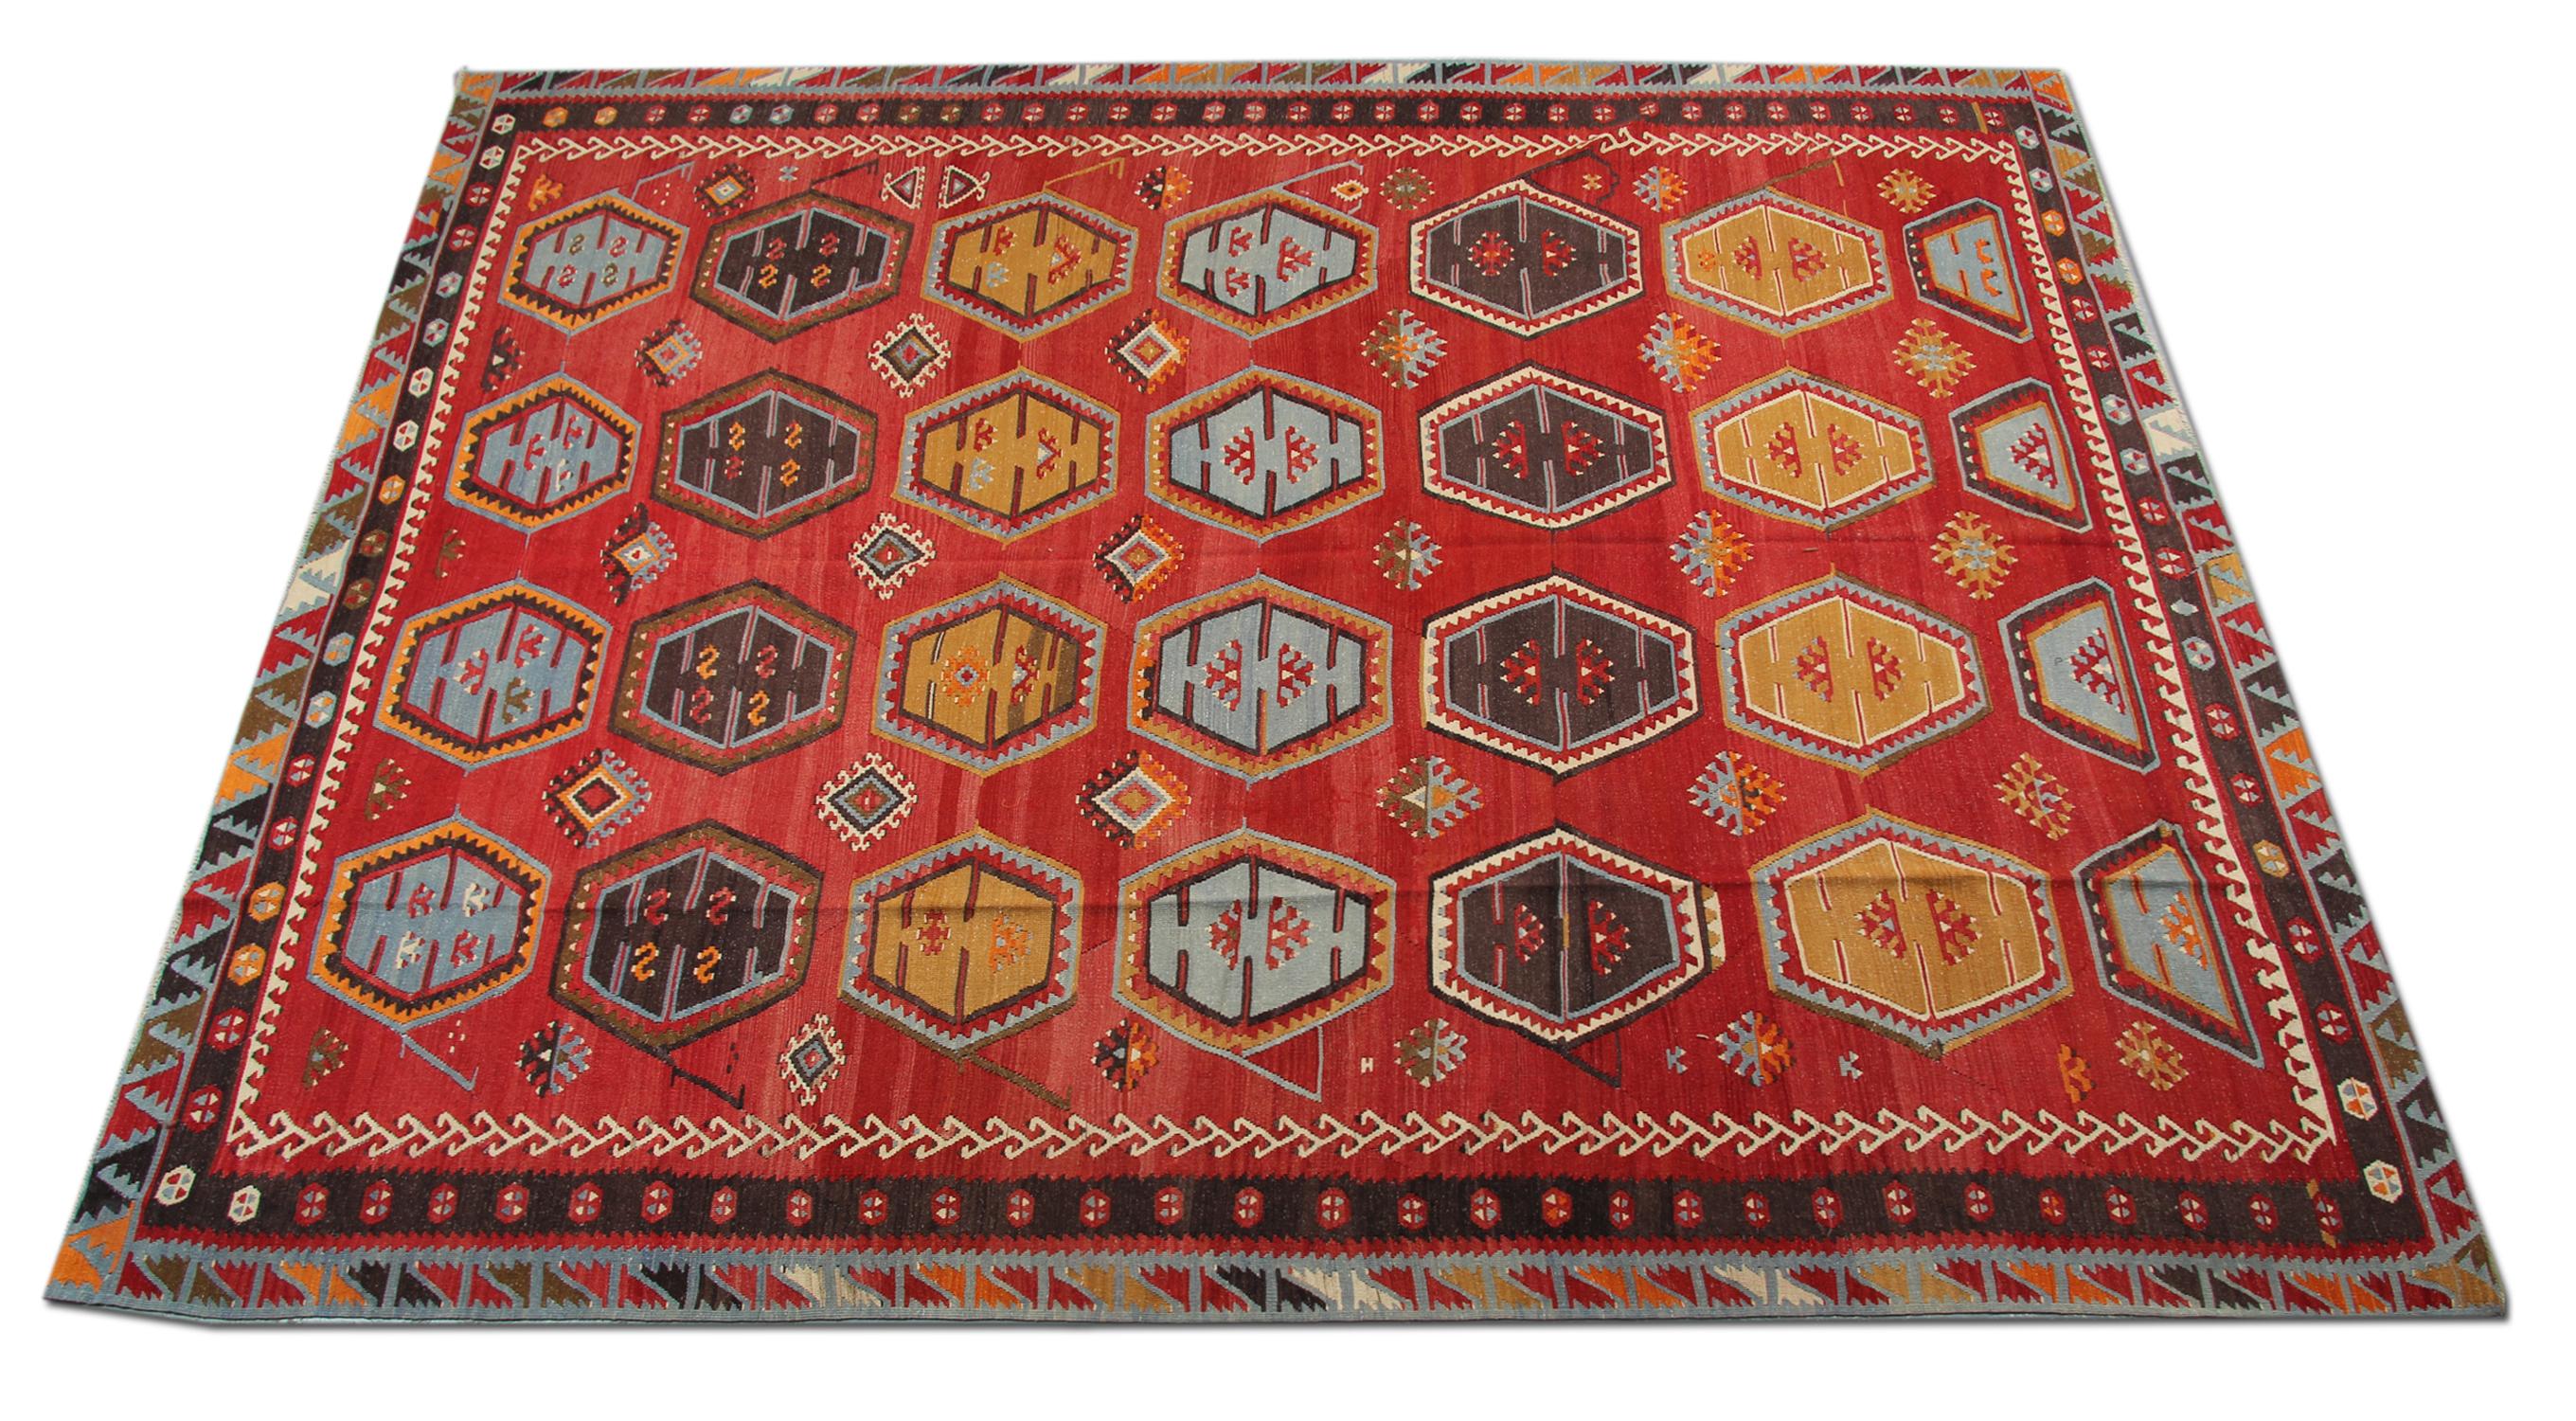 The handmade carpet S¸arkis¸la Kilim rugs are one of the most decorative rugs; Turkish Kilim can be an additional design element to one's home decor.
Most Kilims can always be in harmony with the interior and complement the art and architecture of